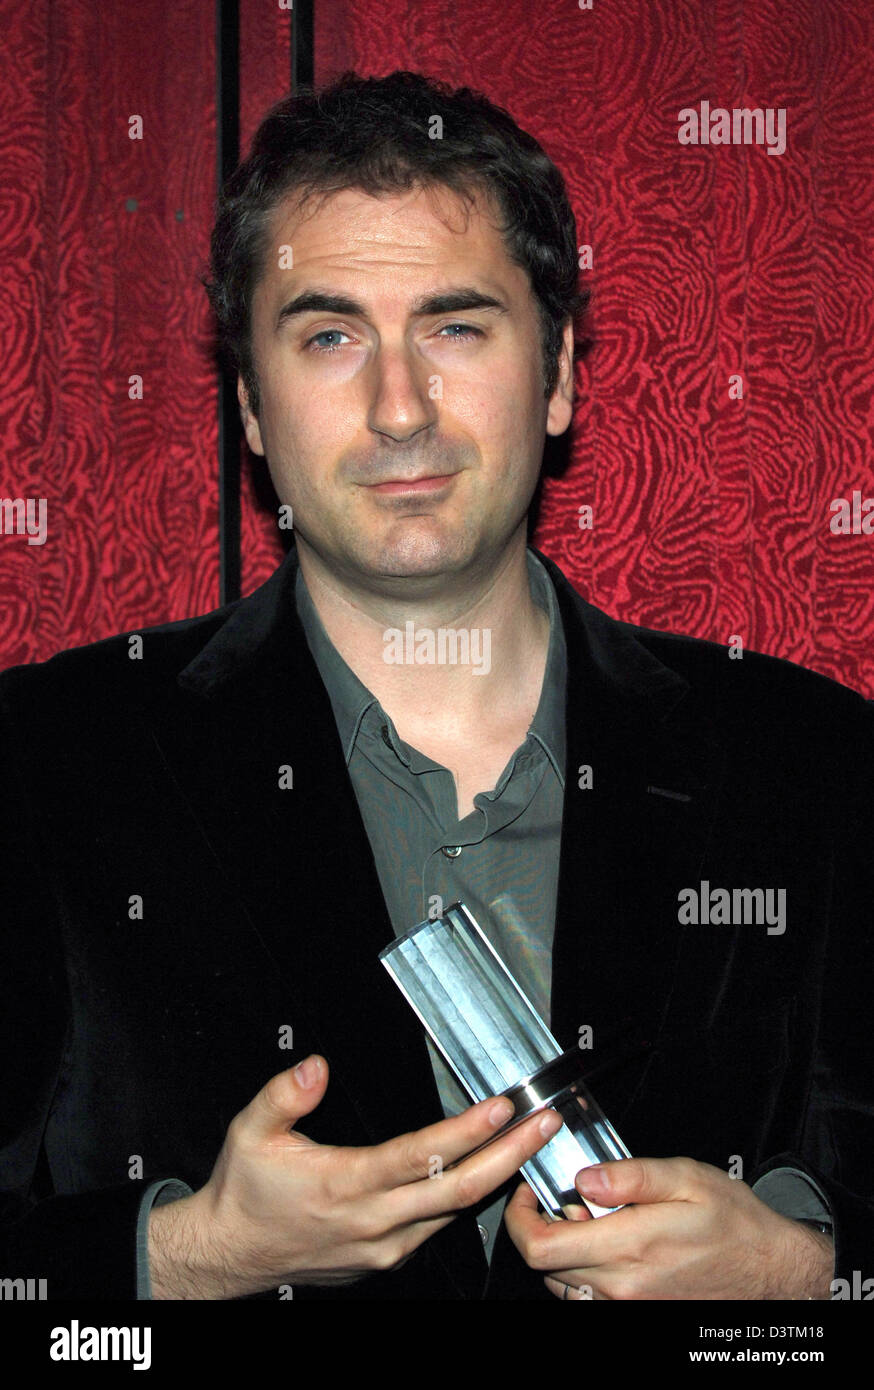 French director Xavier Giannoli holds the 'Douglas-Sirk-Prize', which was awarded to French actor Gerard Depardieu, in his hands at the Film Festival in Hamburg, Germany, Tuesday, 10 October 2006. Depardieu was hindered due to shooting assignements. His film 'Quand j' étais chanteur' premiered after the award ceremony. Photo: Wolfgang Langenstrassen Stock Photo